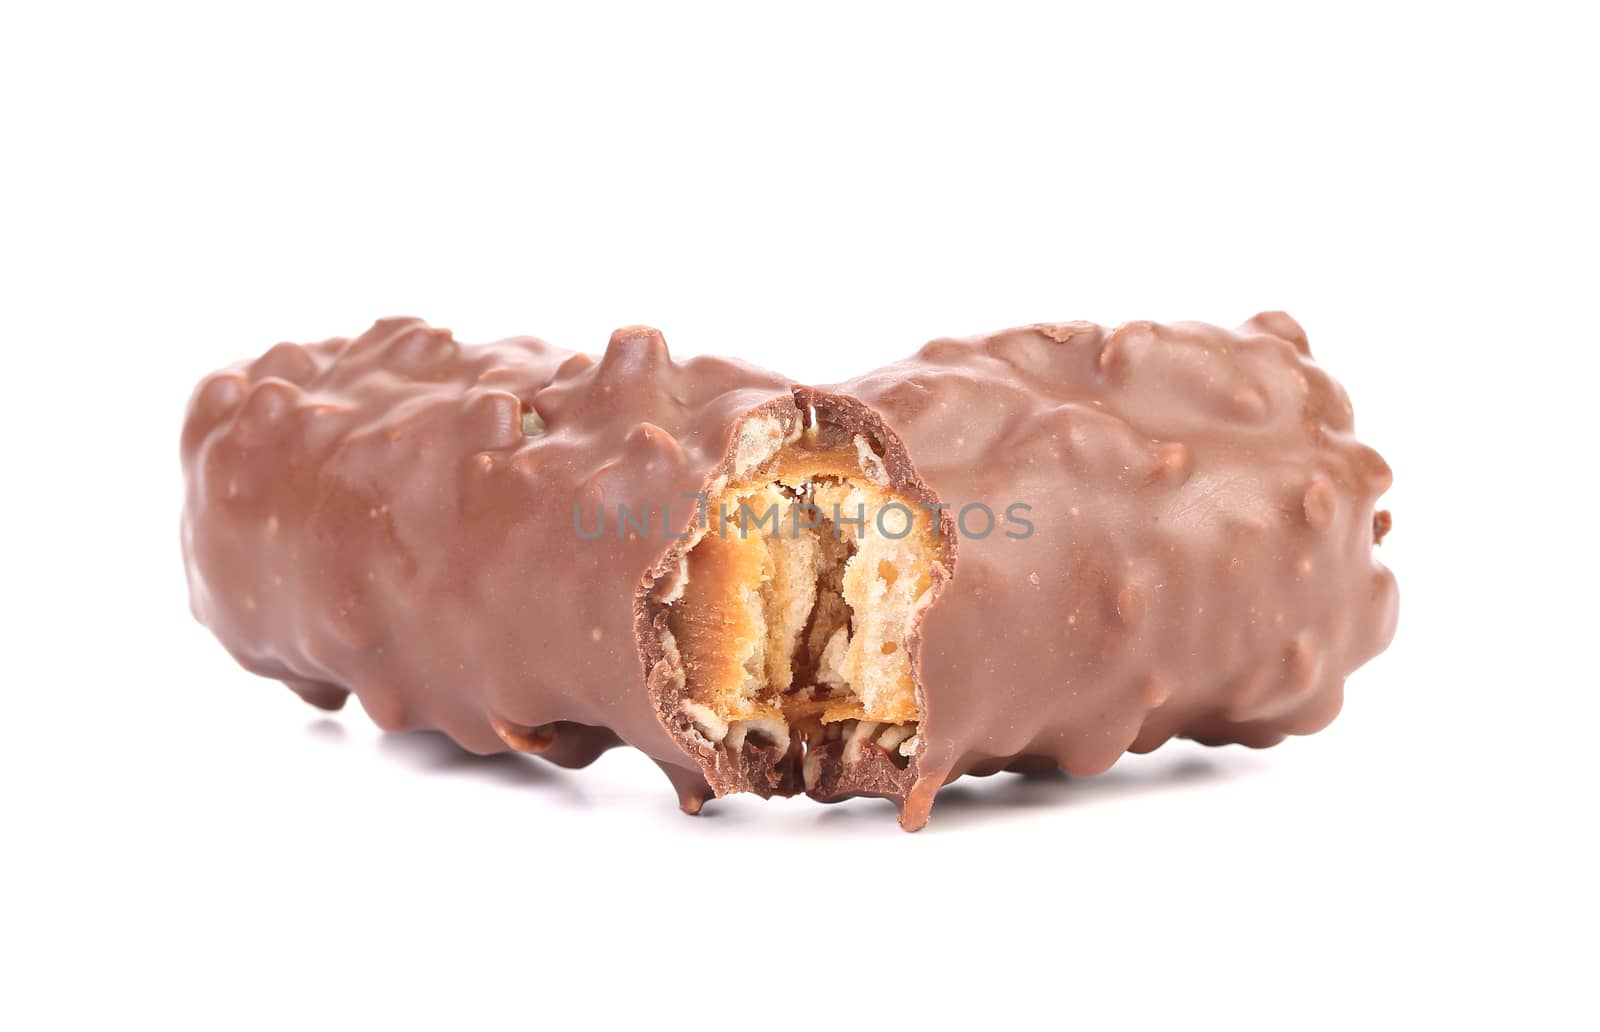 Broken chocolate bars with filling. Isolated on a white background.